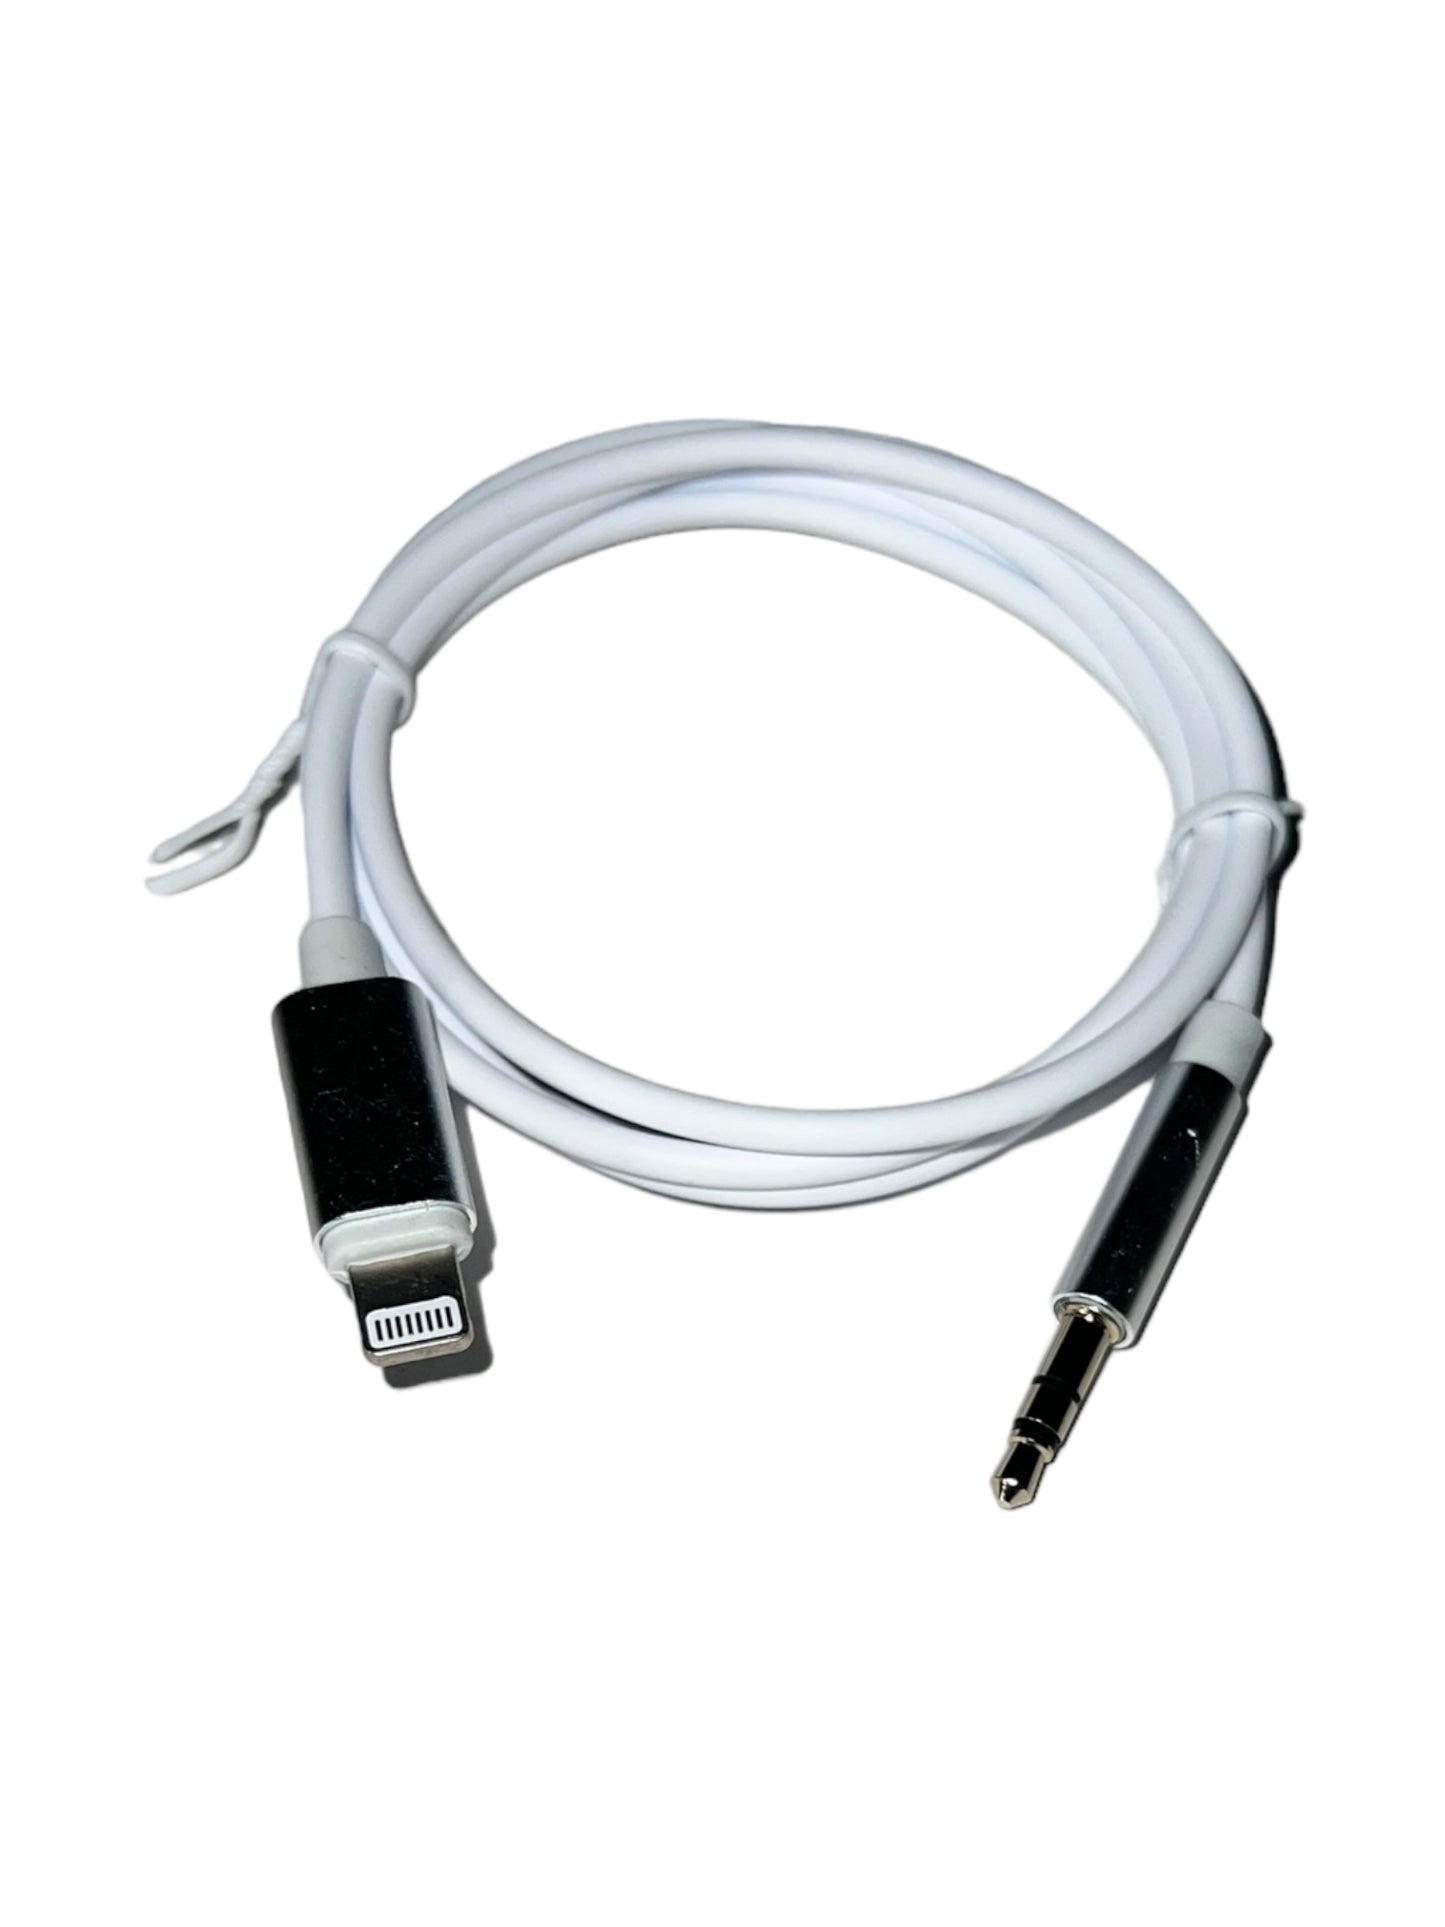 8 Pin to 3.5 AUX Audio White Adapter Cable